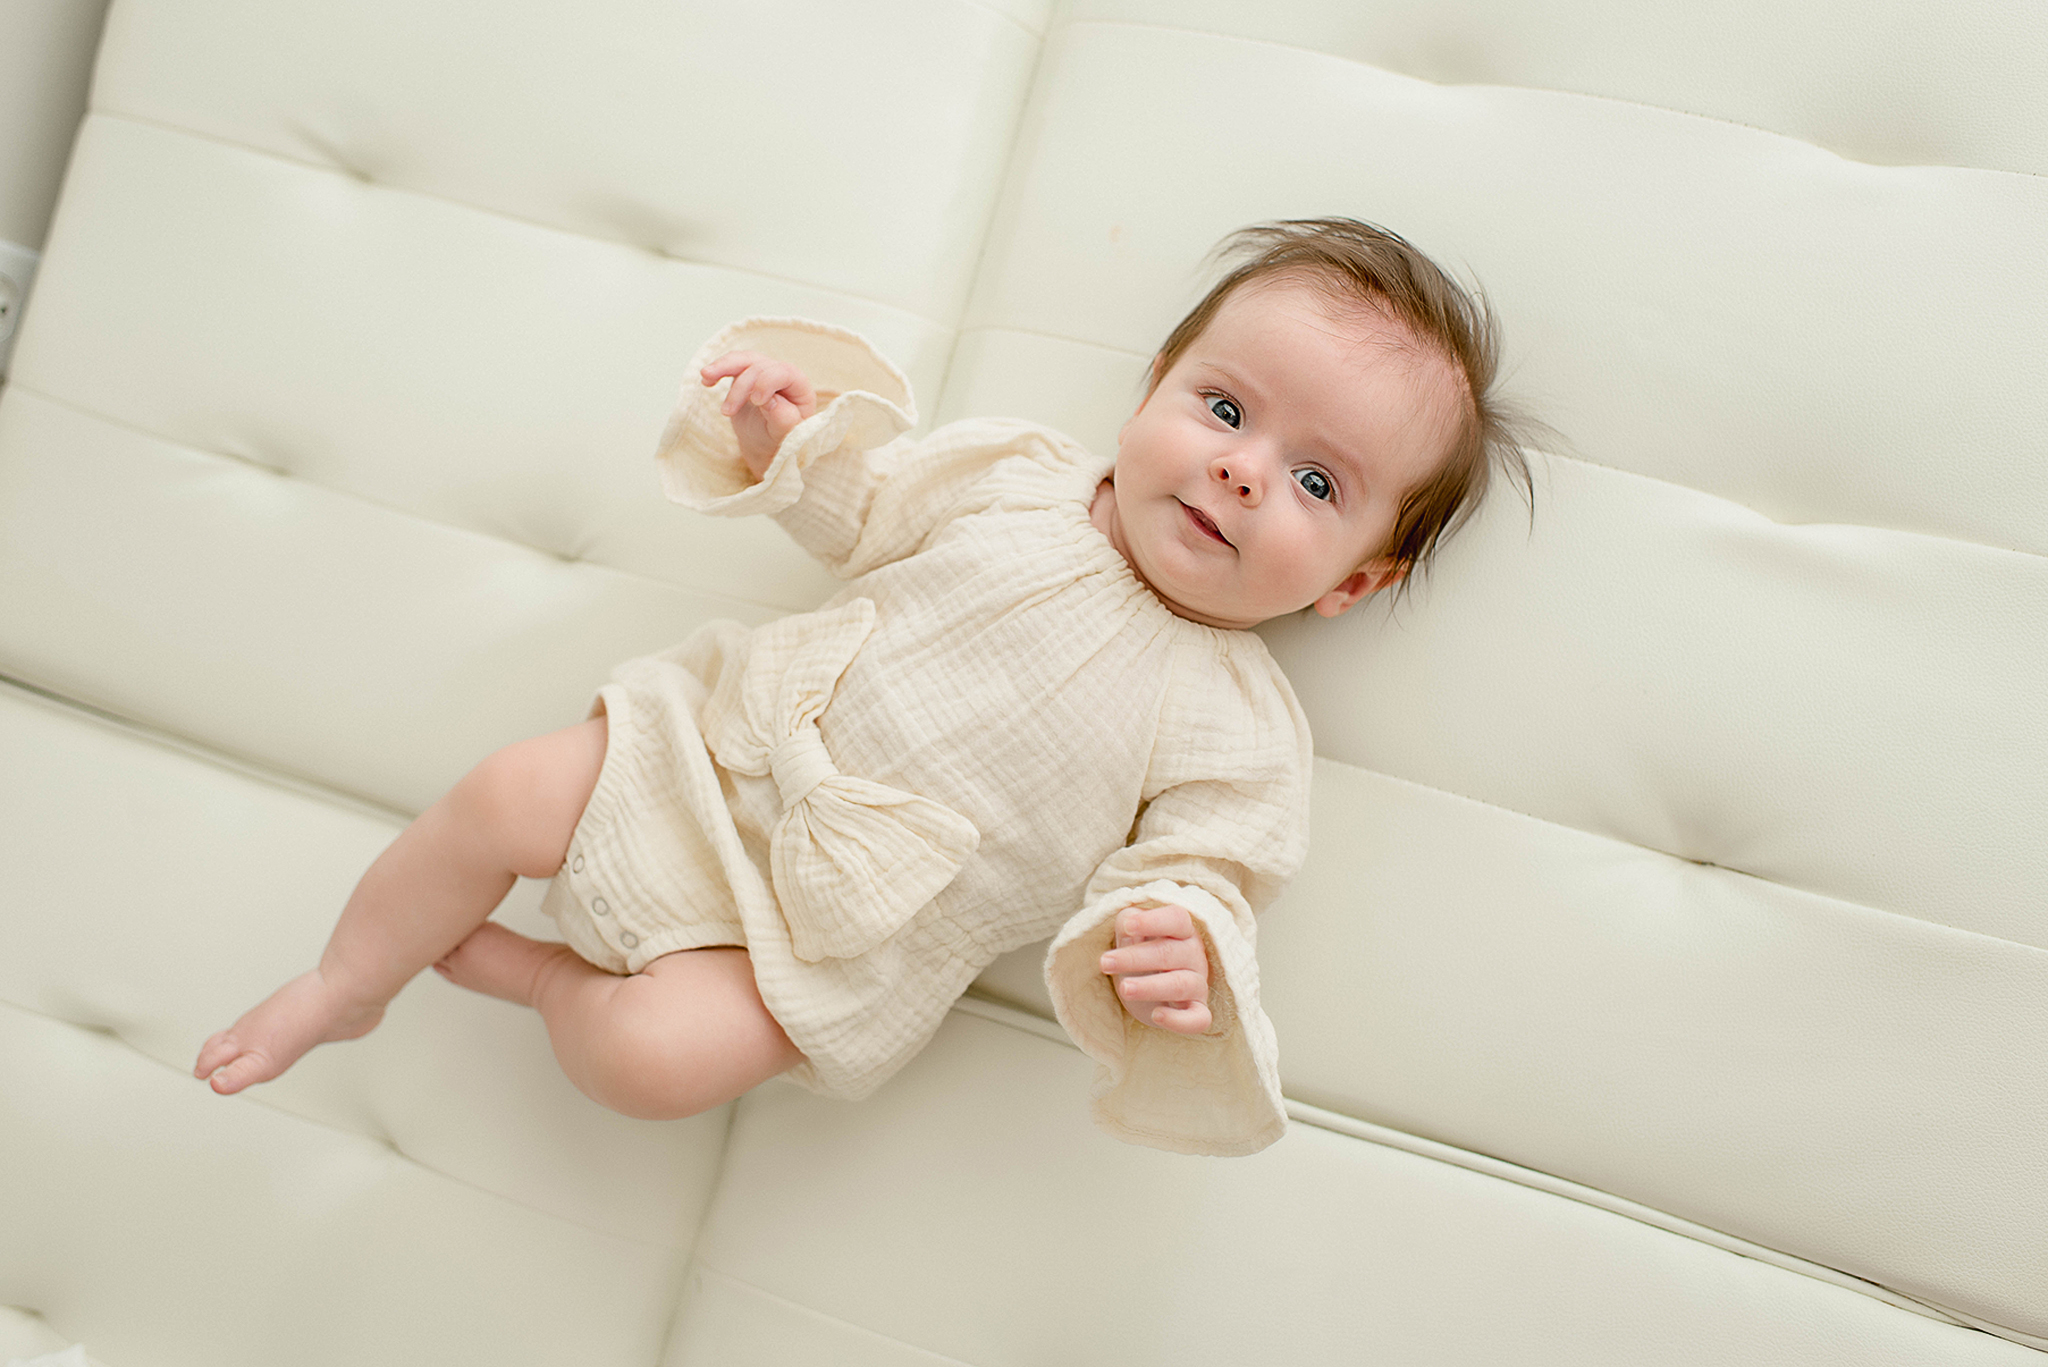 A newborn baby in a creme onesie with a bow lays on a leather couch baby shower venues jacksonville florida